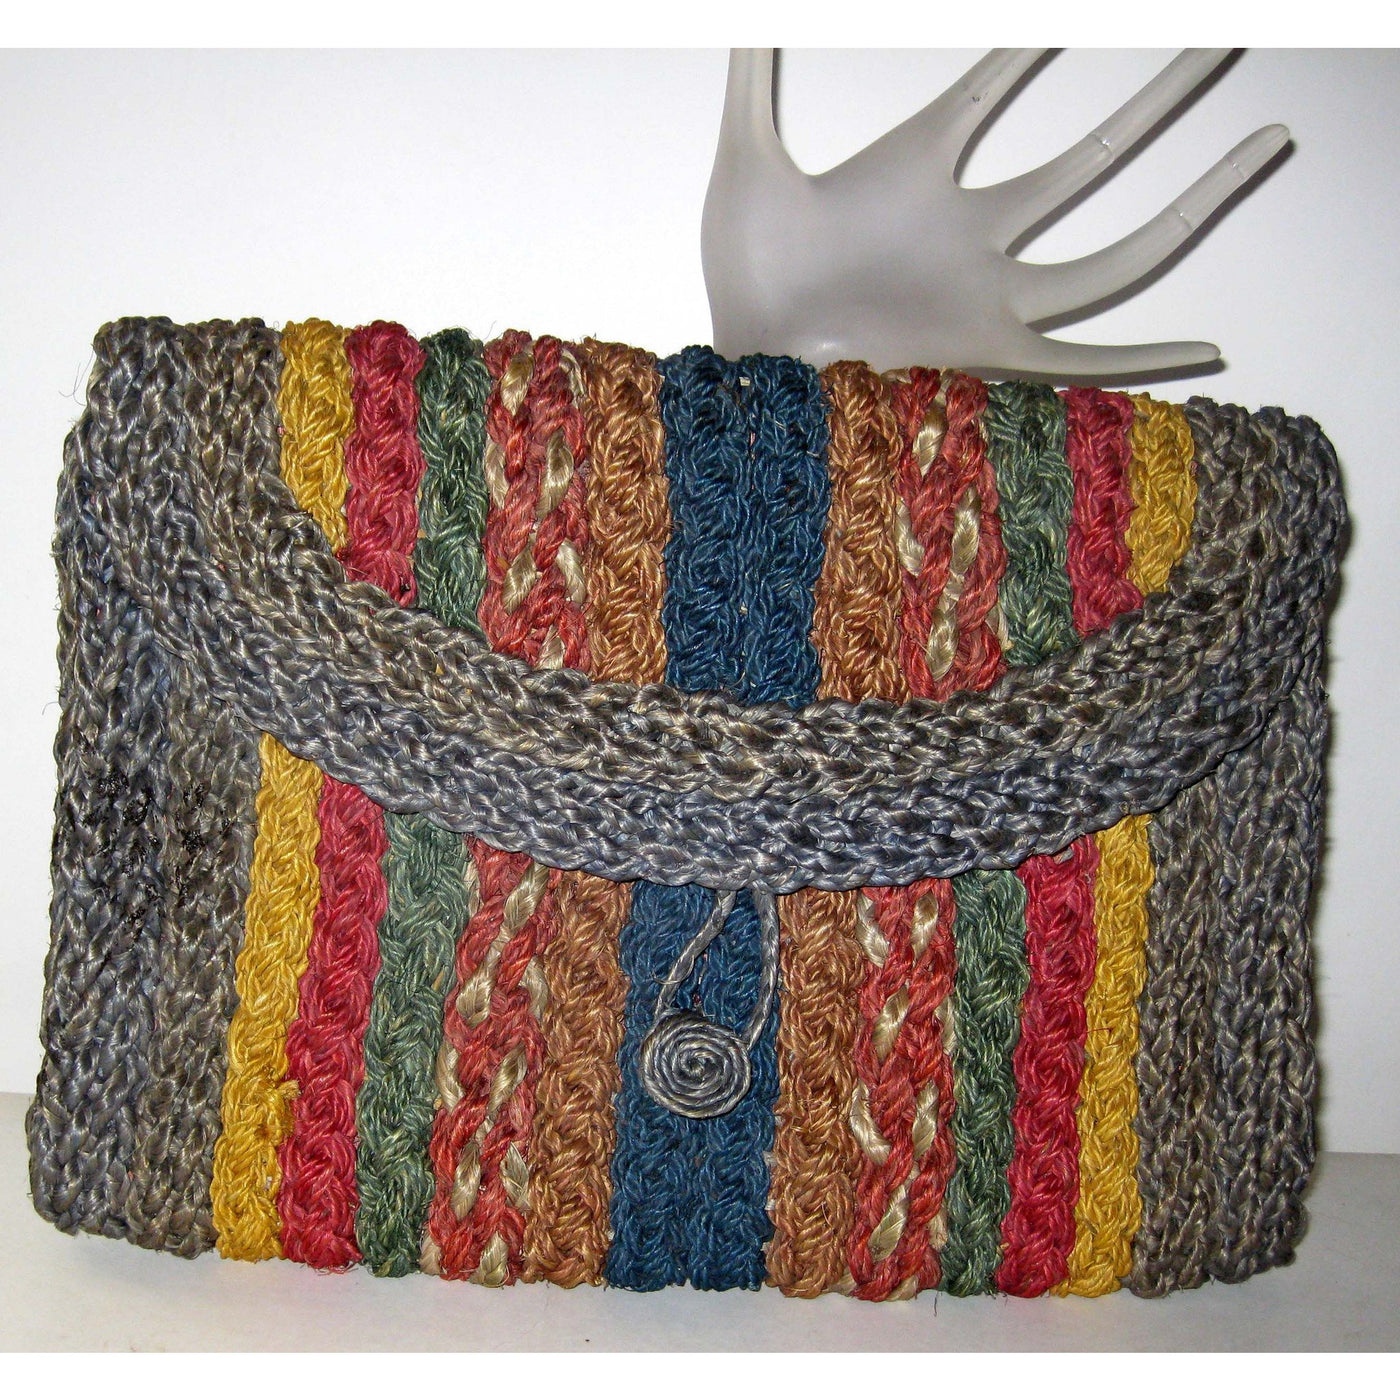 Vintage Colorful Woven Straw Clutch Purse